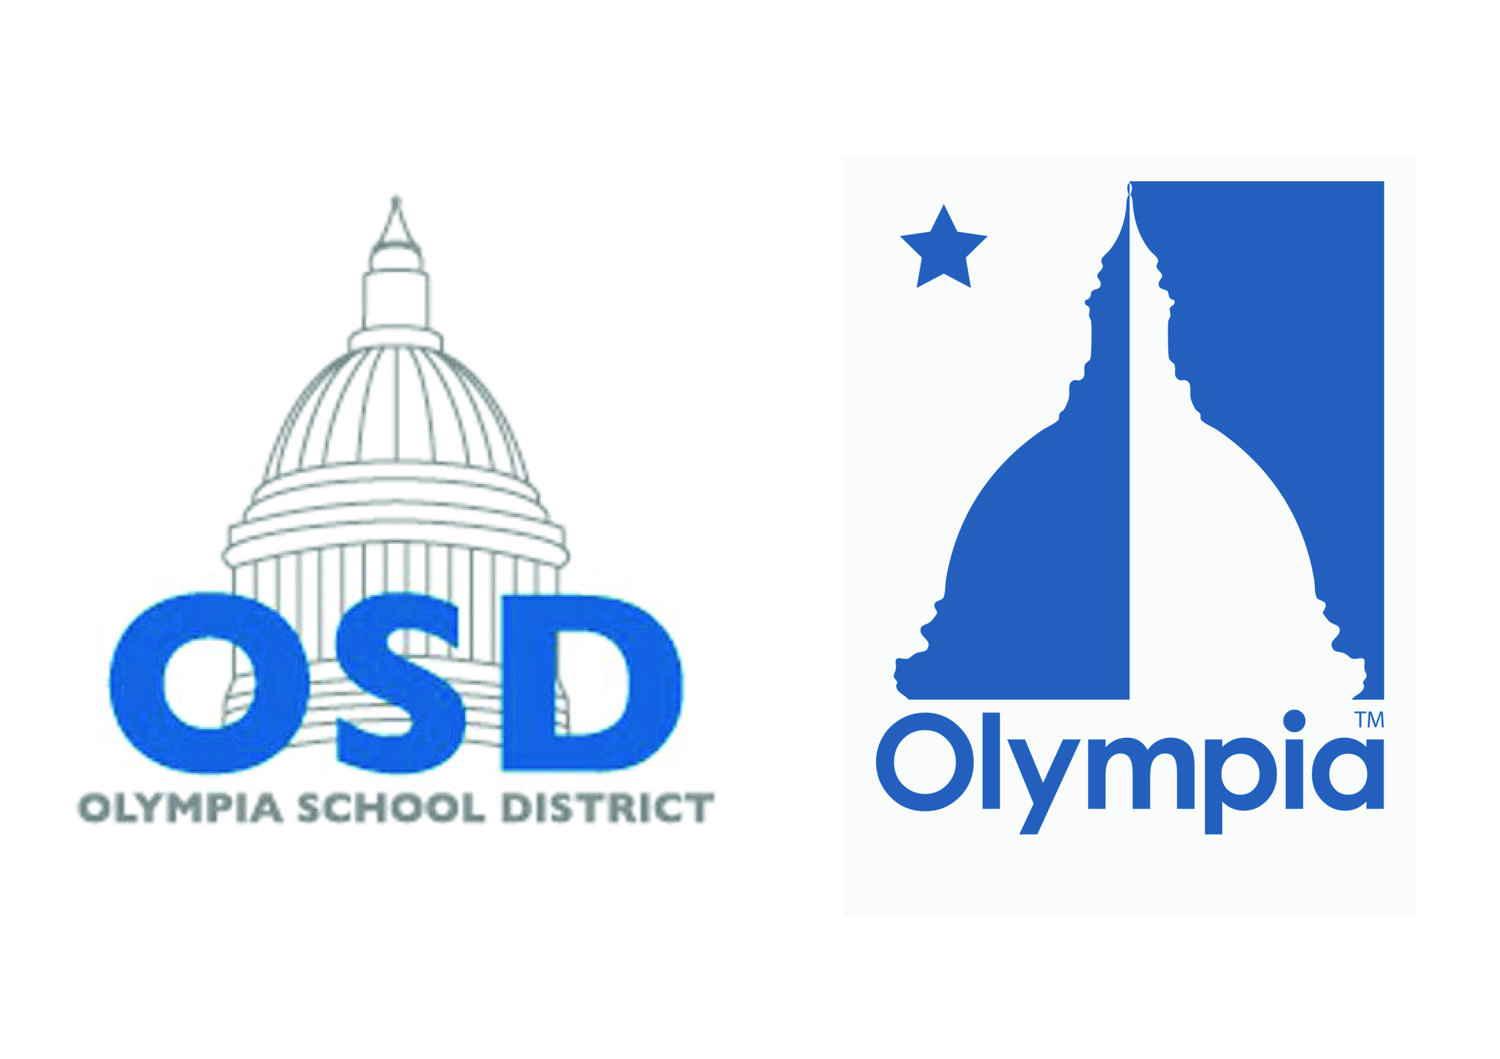 The Olympia School District board meets annually in a joint meeting with the Olympia City Council.